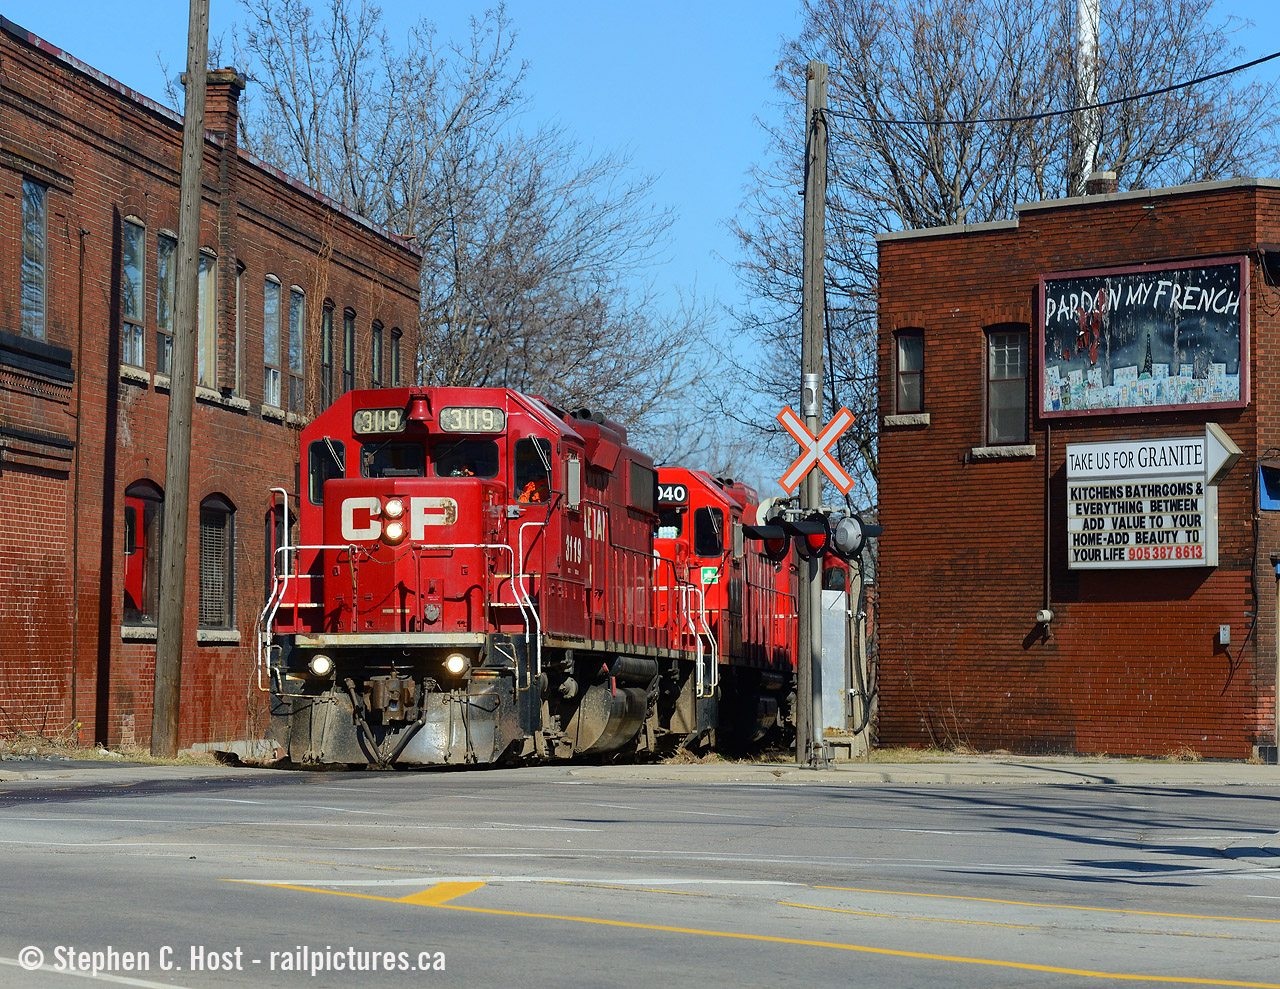 After spending hours switching in North Hamilton the Kinnear yard job TH31 is seen passing between the buildings at Main and Gage on the former TH&B Belt Line. It has been a few years since I've shot here, the last time the motive power was a  trio of GP9's  and this time a trio of GP38-2's making for a nice contrast.